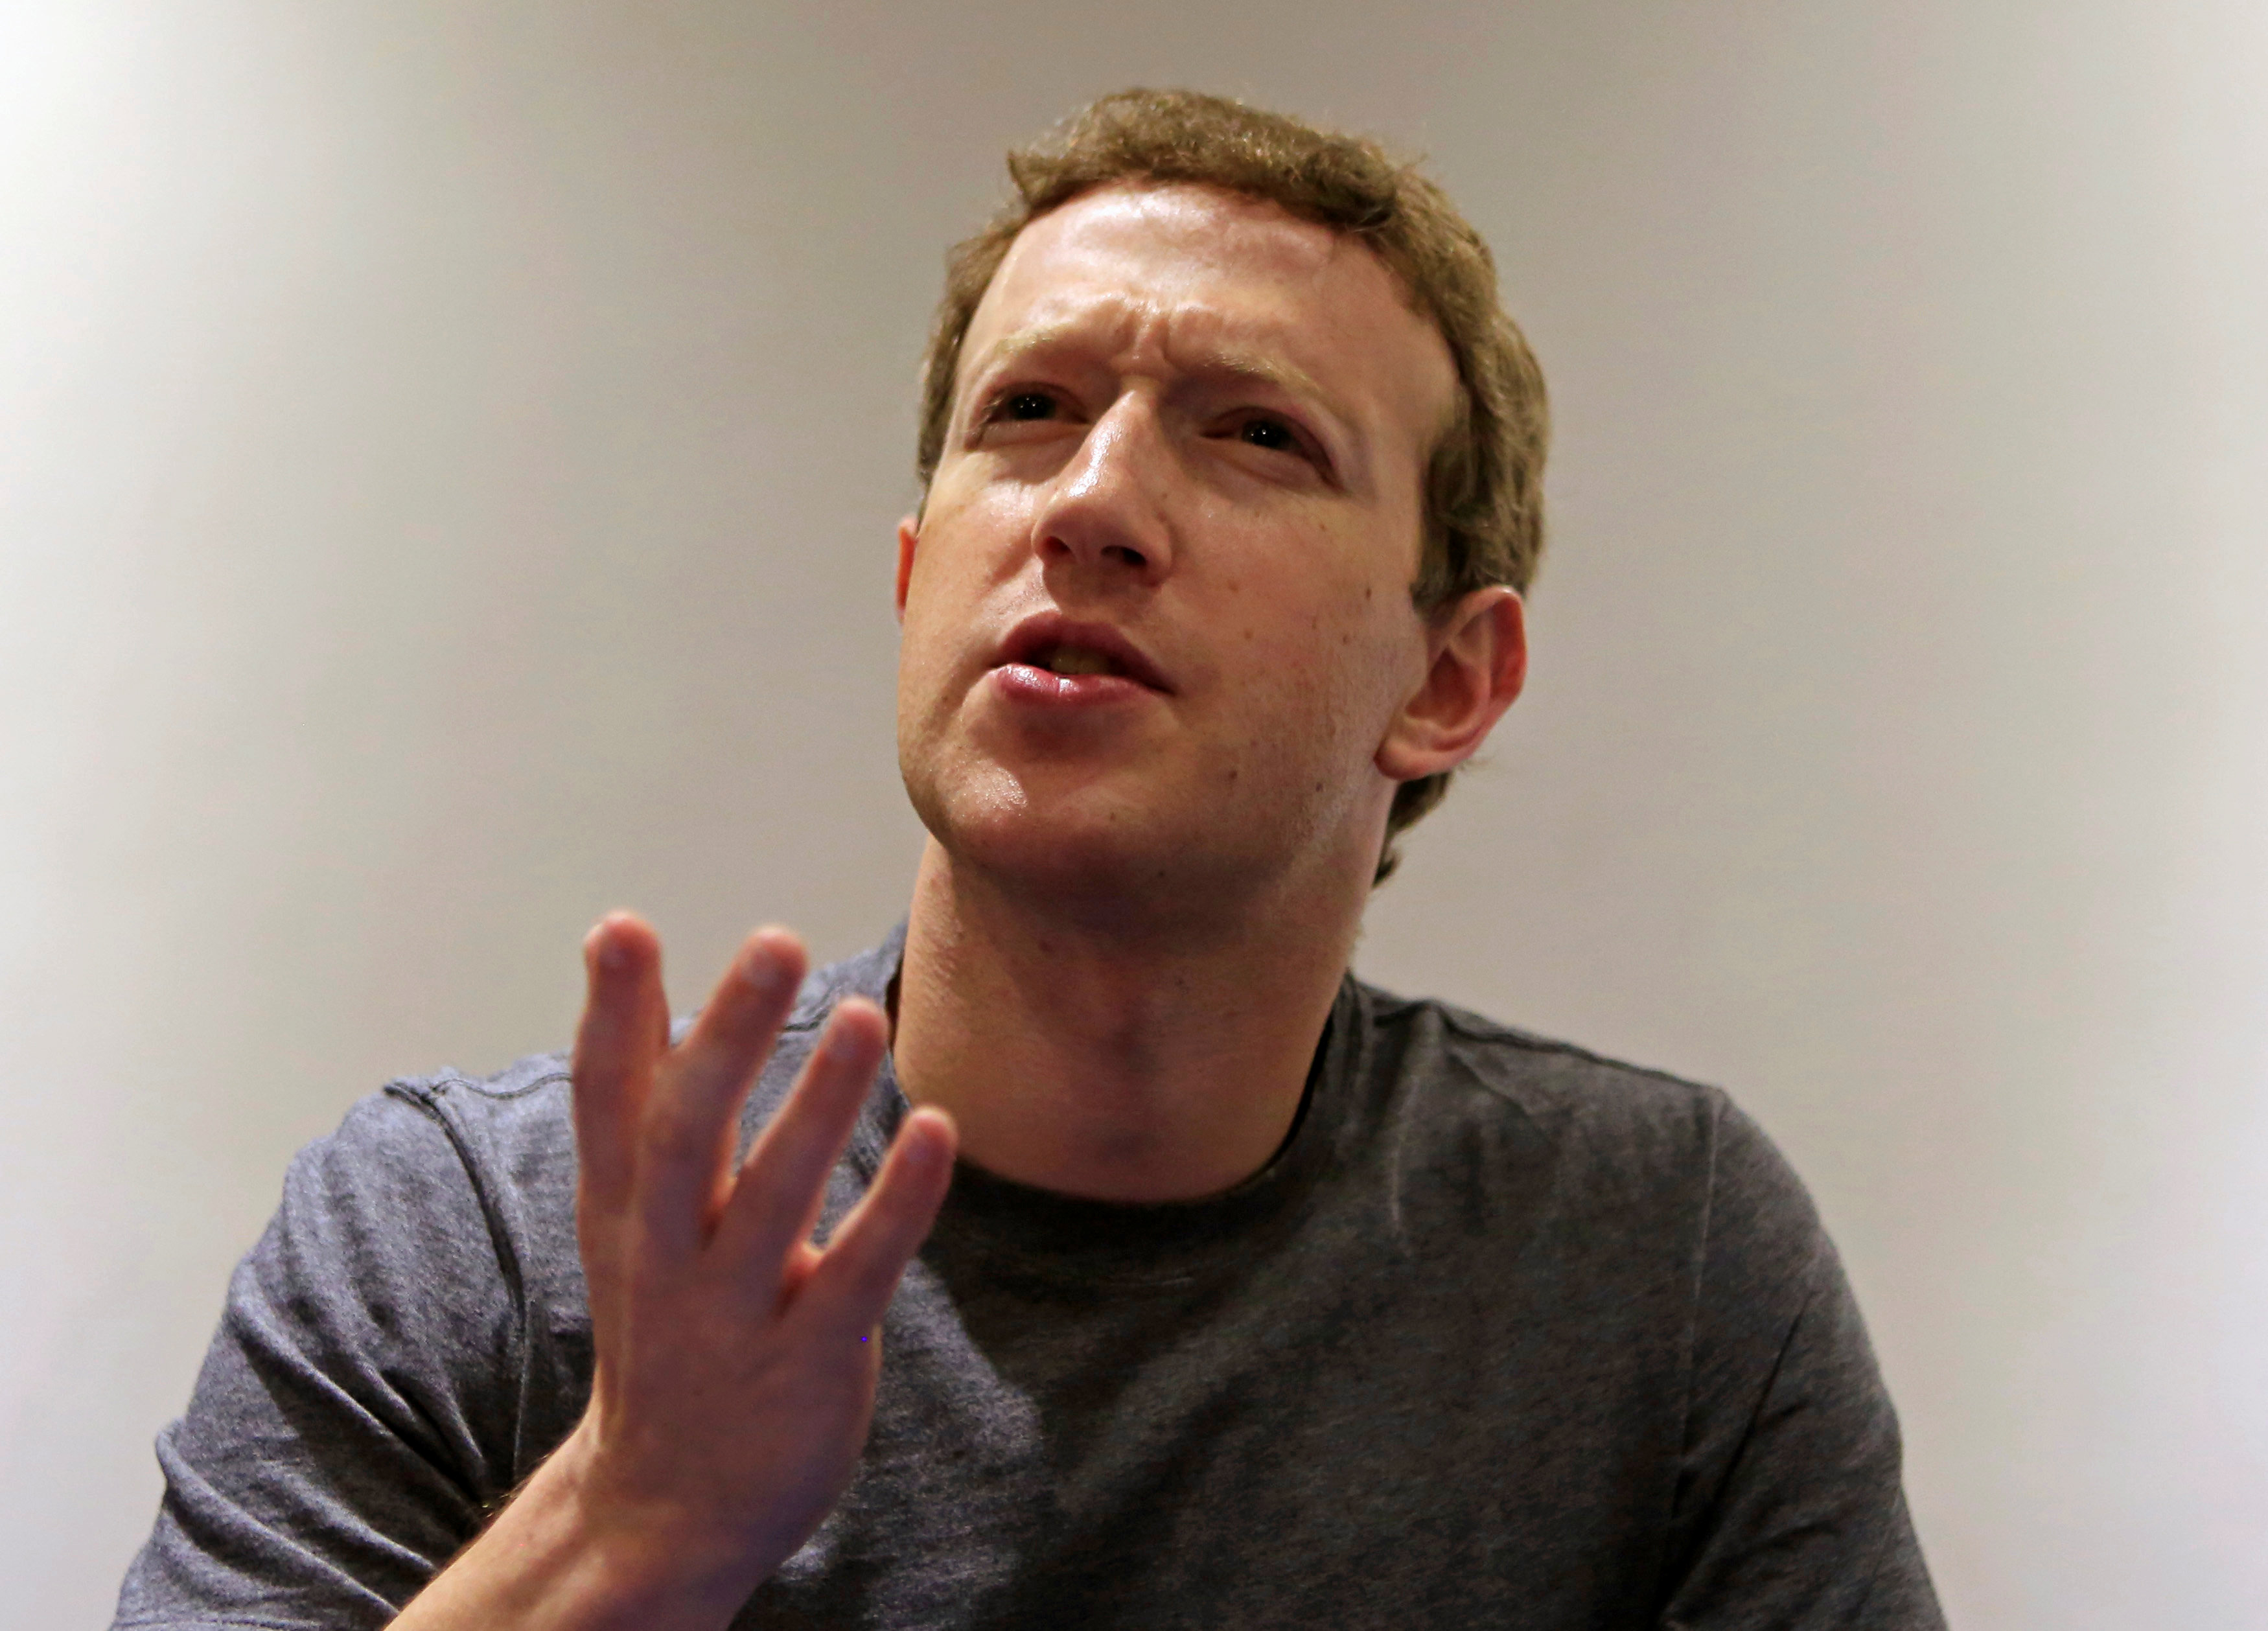 Zuckerberg sees 'progress' for Facebook after tumultuous year